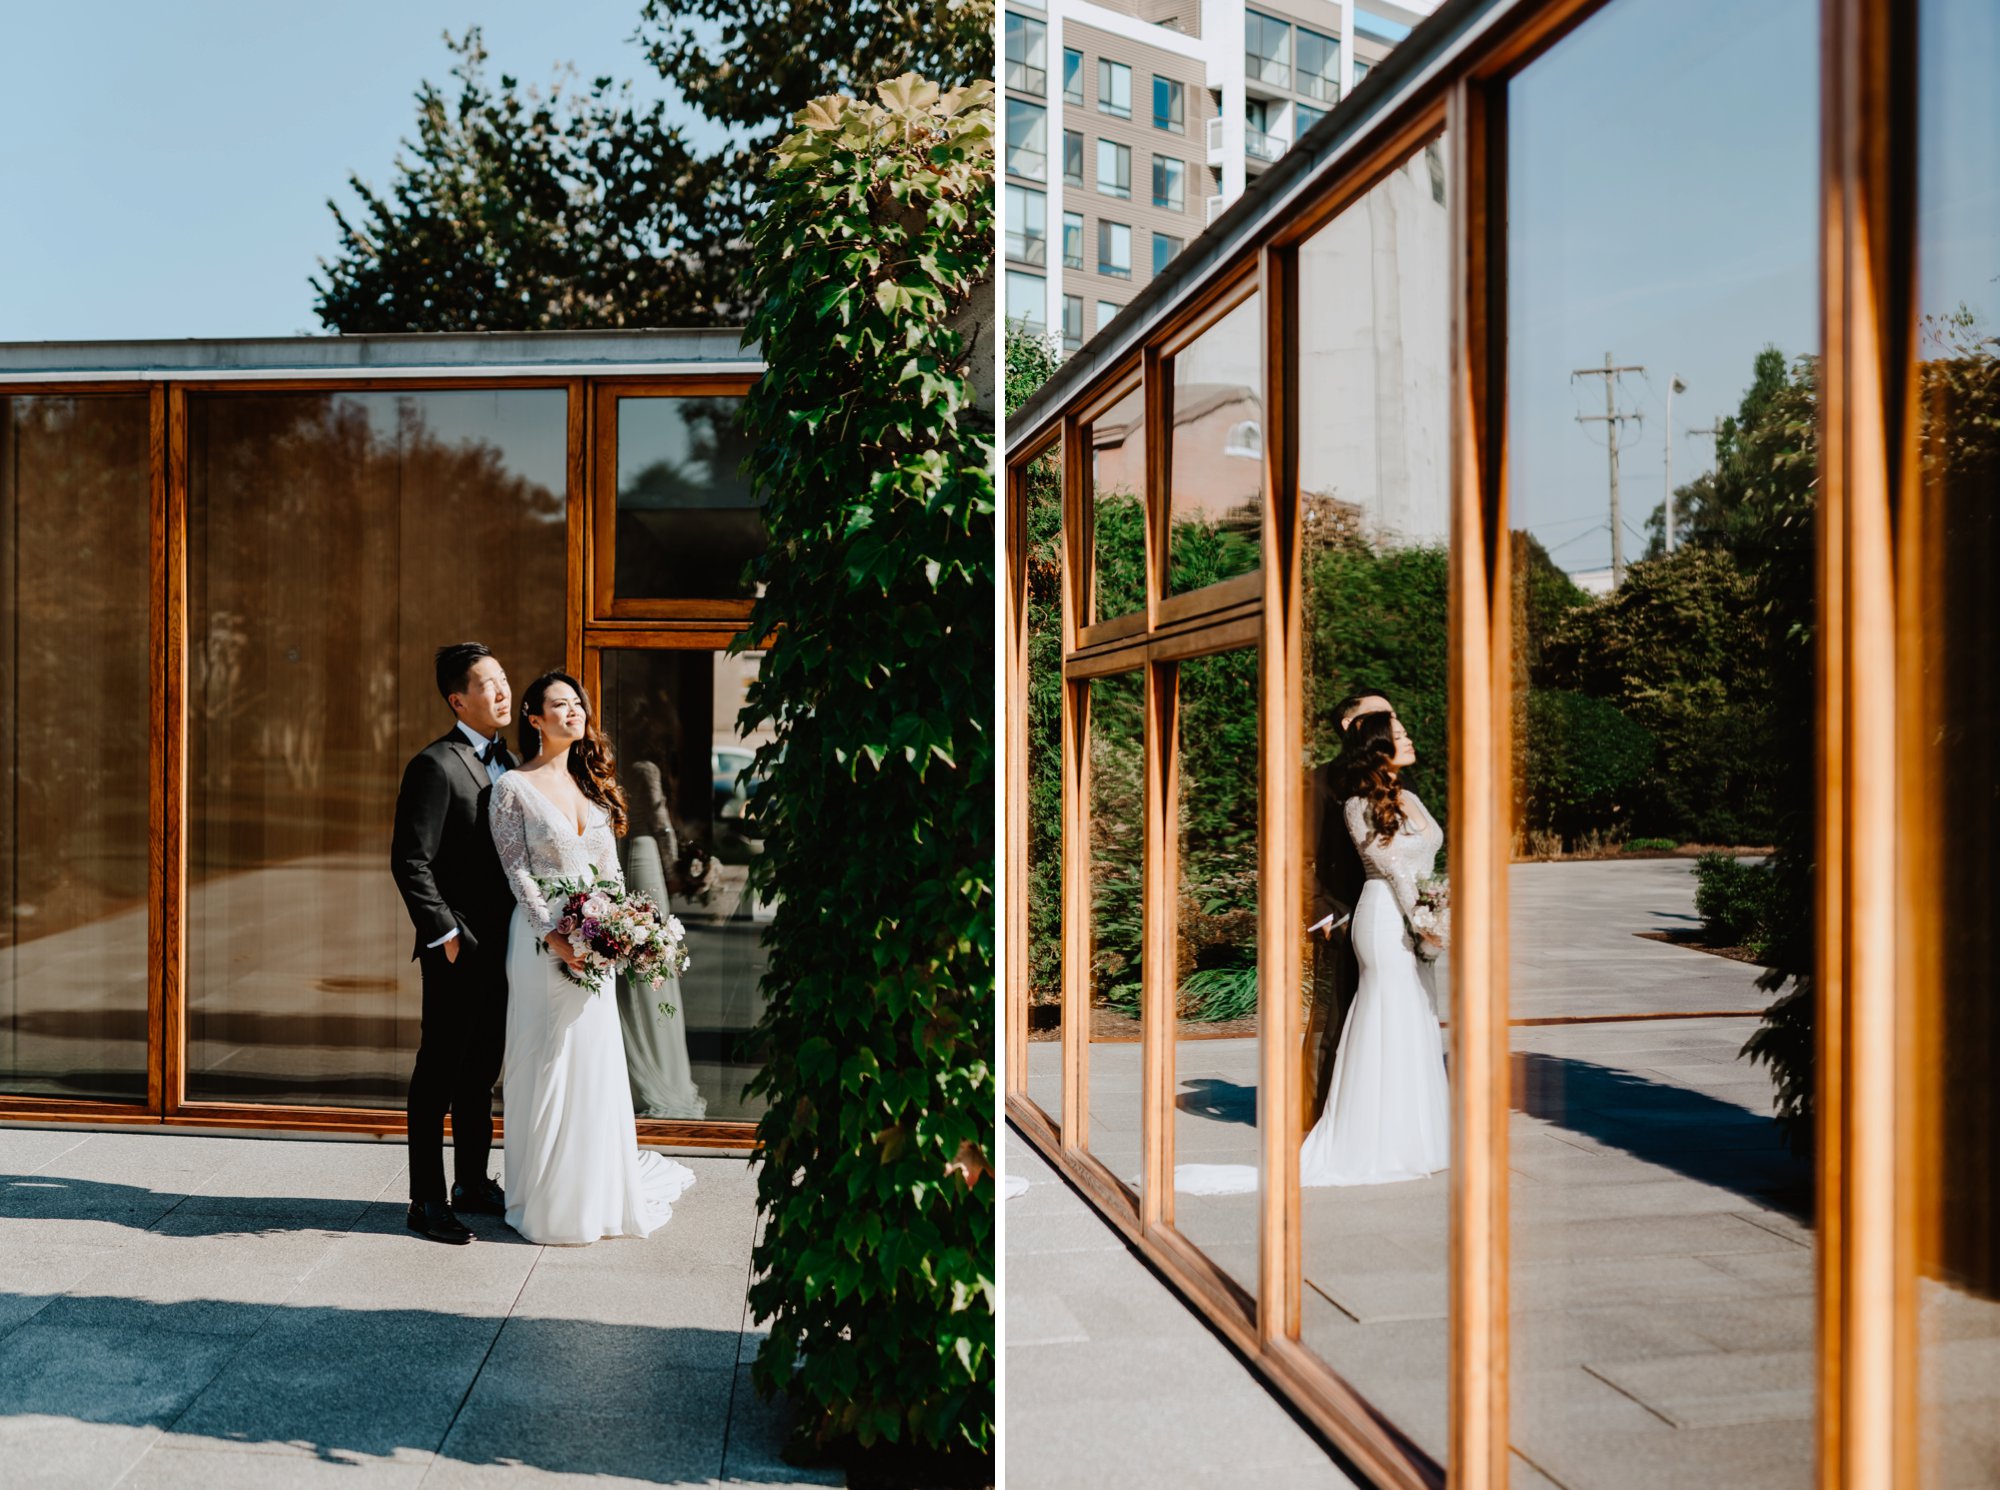 Modern Philadelphia Wedding with a Traditional Tea Ceremony and other Asian Traditions with Glamorous Portraits